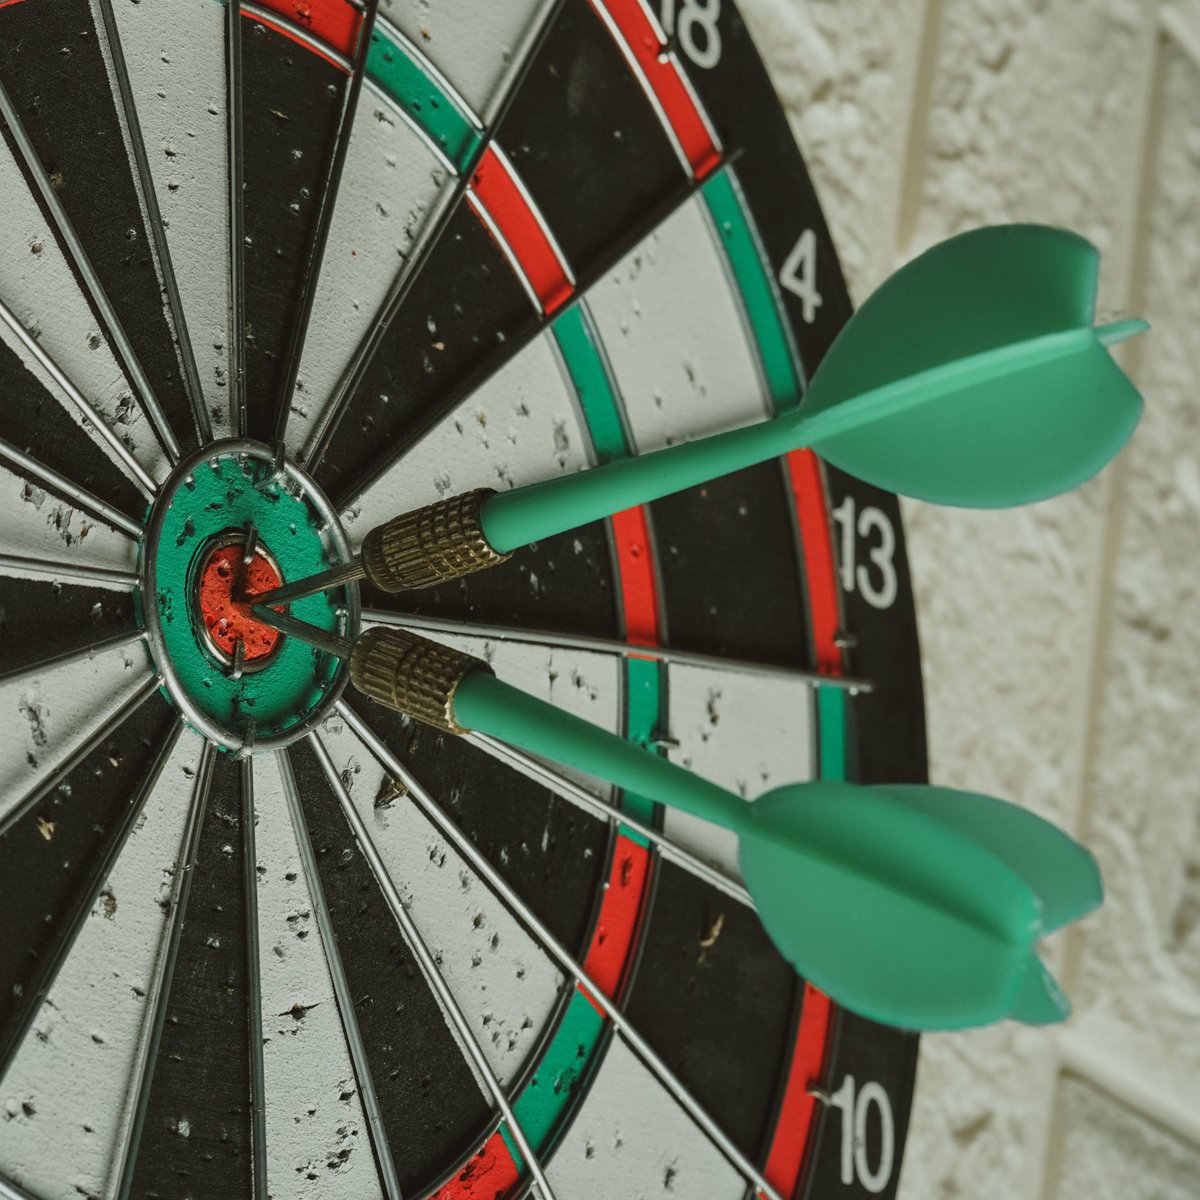 As darts fever grips the nation we’re asking you this morning on @TringRadio what your darts player nickname would be? Let us know! #herts #bucks #beds #localradio #tringradio #music #hits #yourstation #news #darts #180